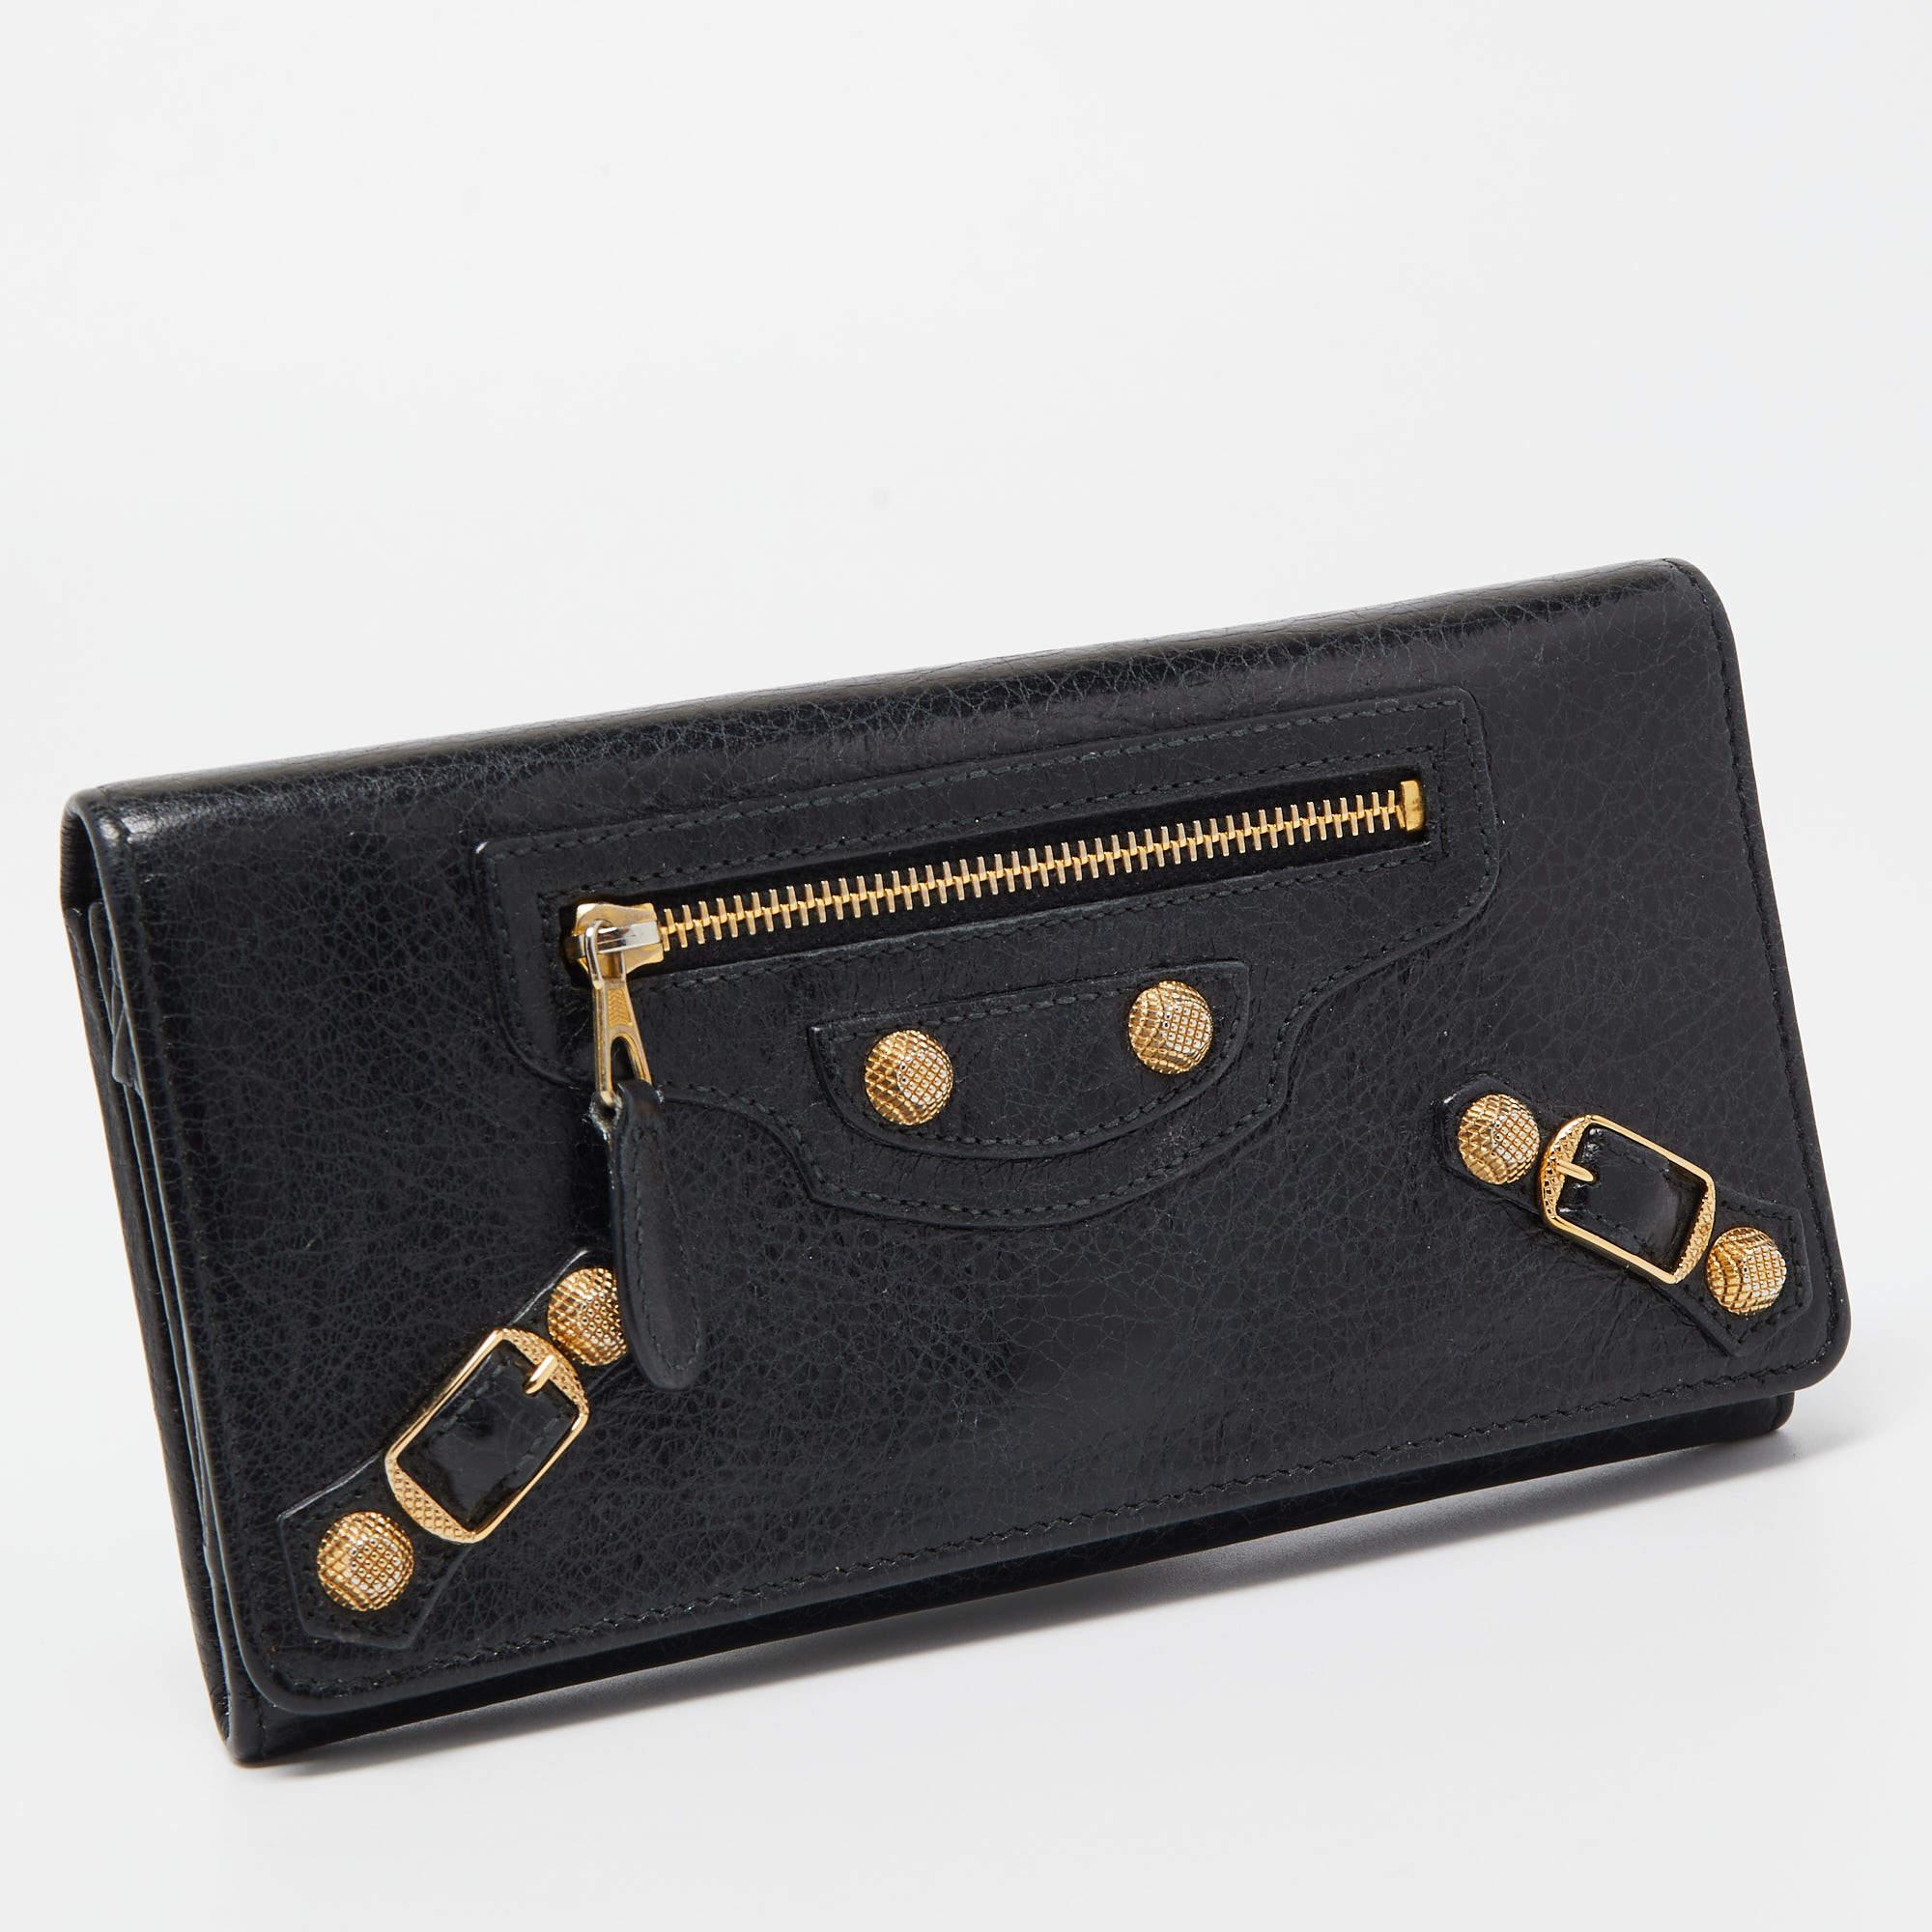 This Balenciaga black wallet brings along a touch of luxury and immense style. It comes perfectly crafted to neatly carry your cards and cash.

